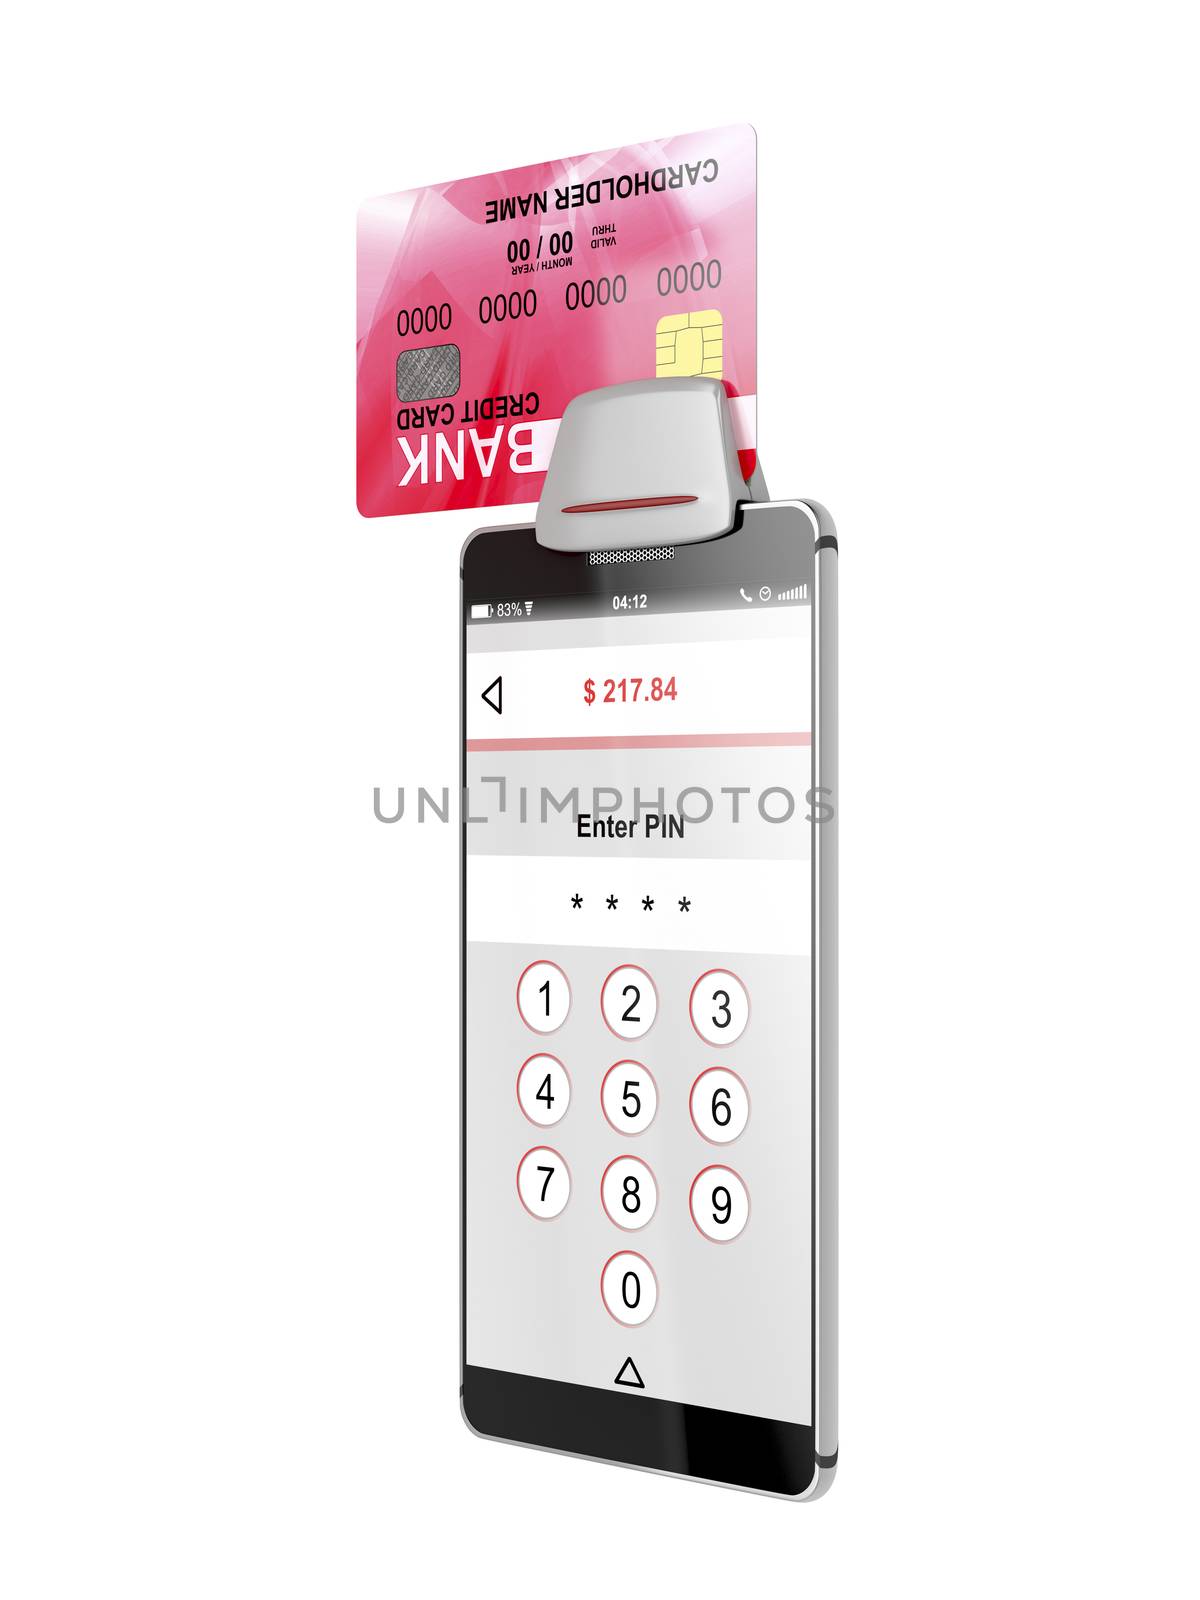 Smartphone and credit card reader by magraphics